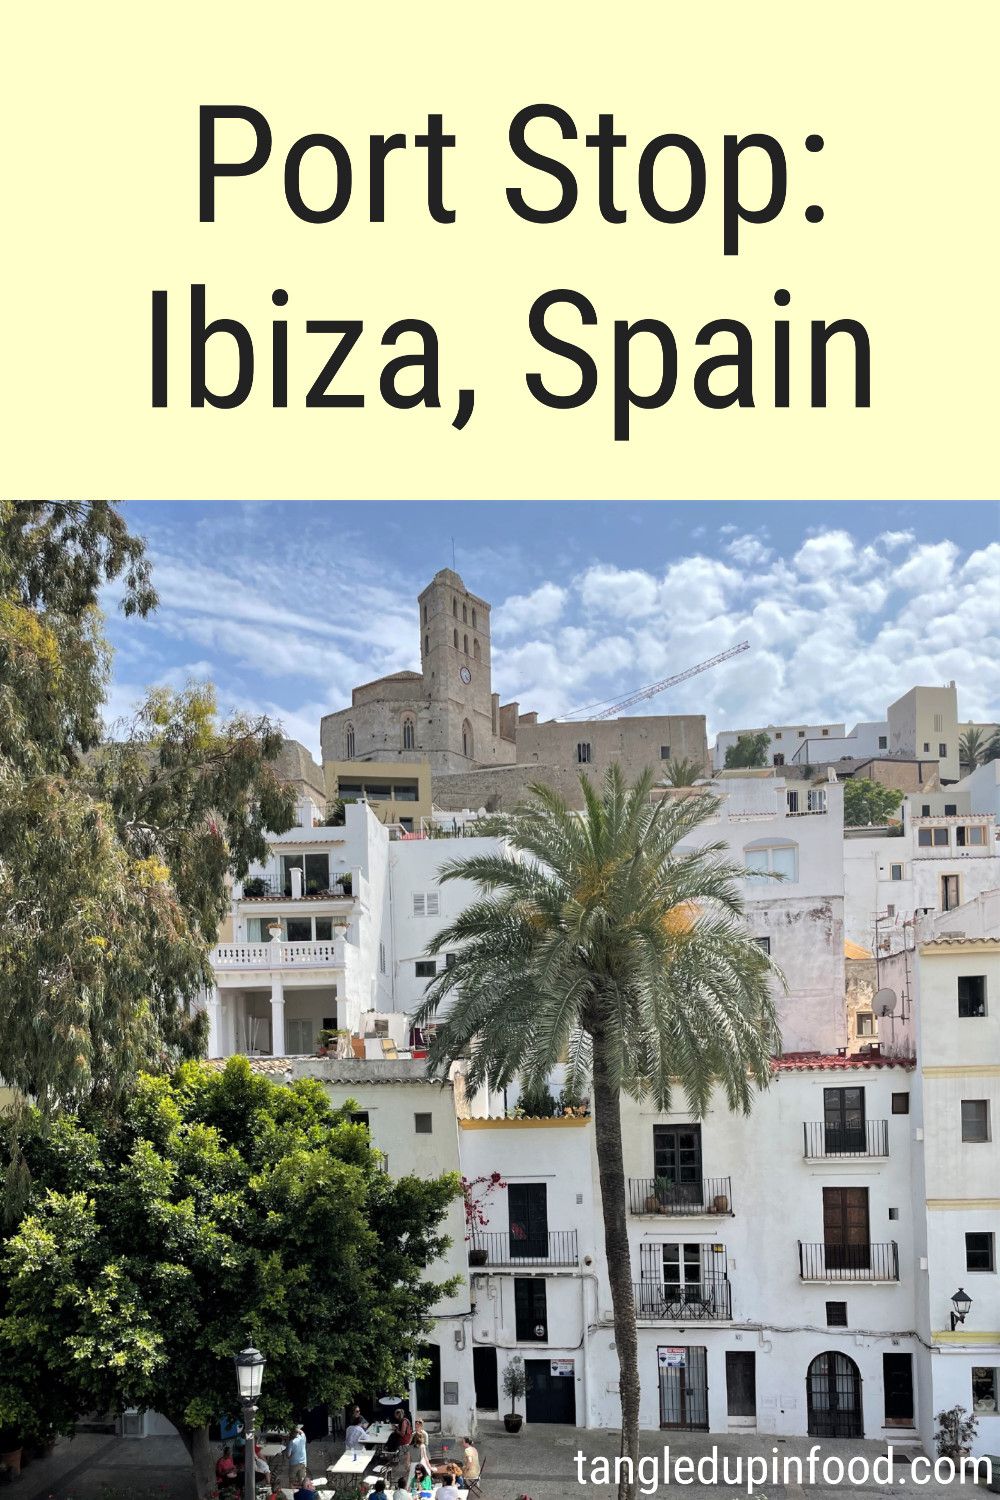 Photo of cathedral and palm tree with text reading "Port Stop: Ibiza, Spain"